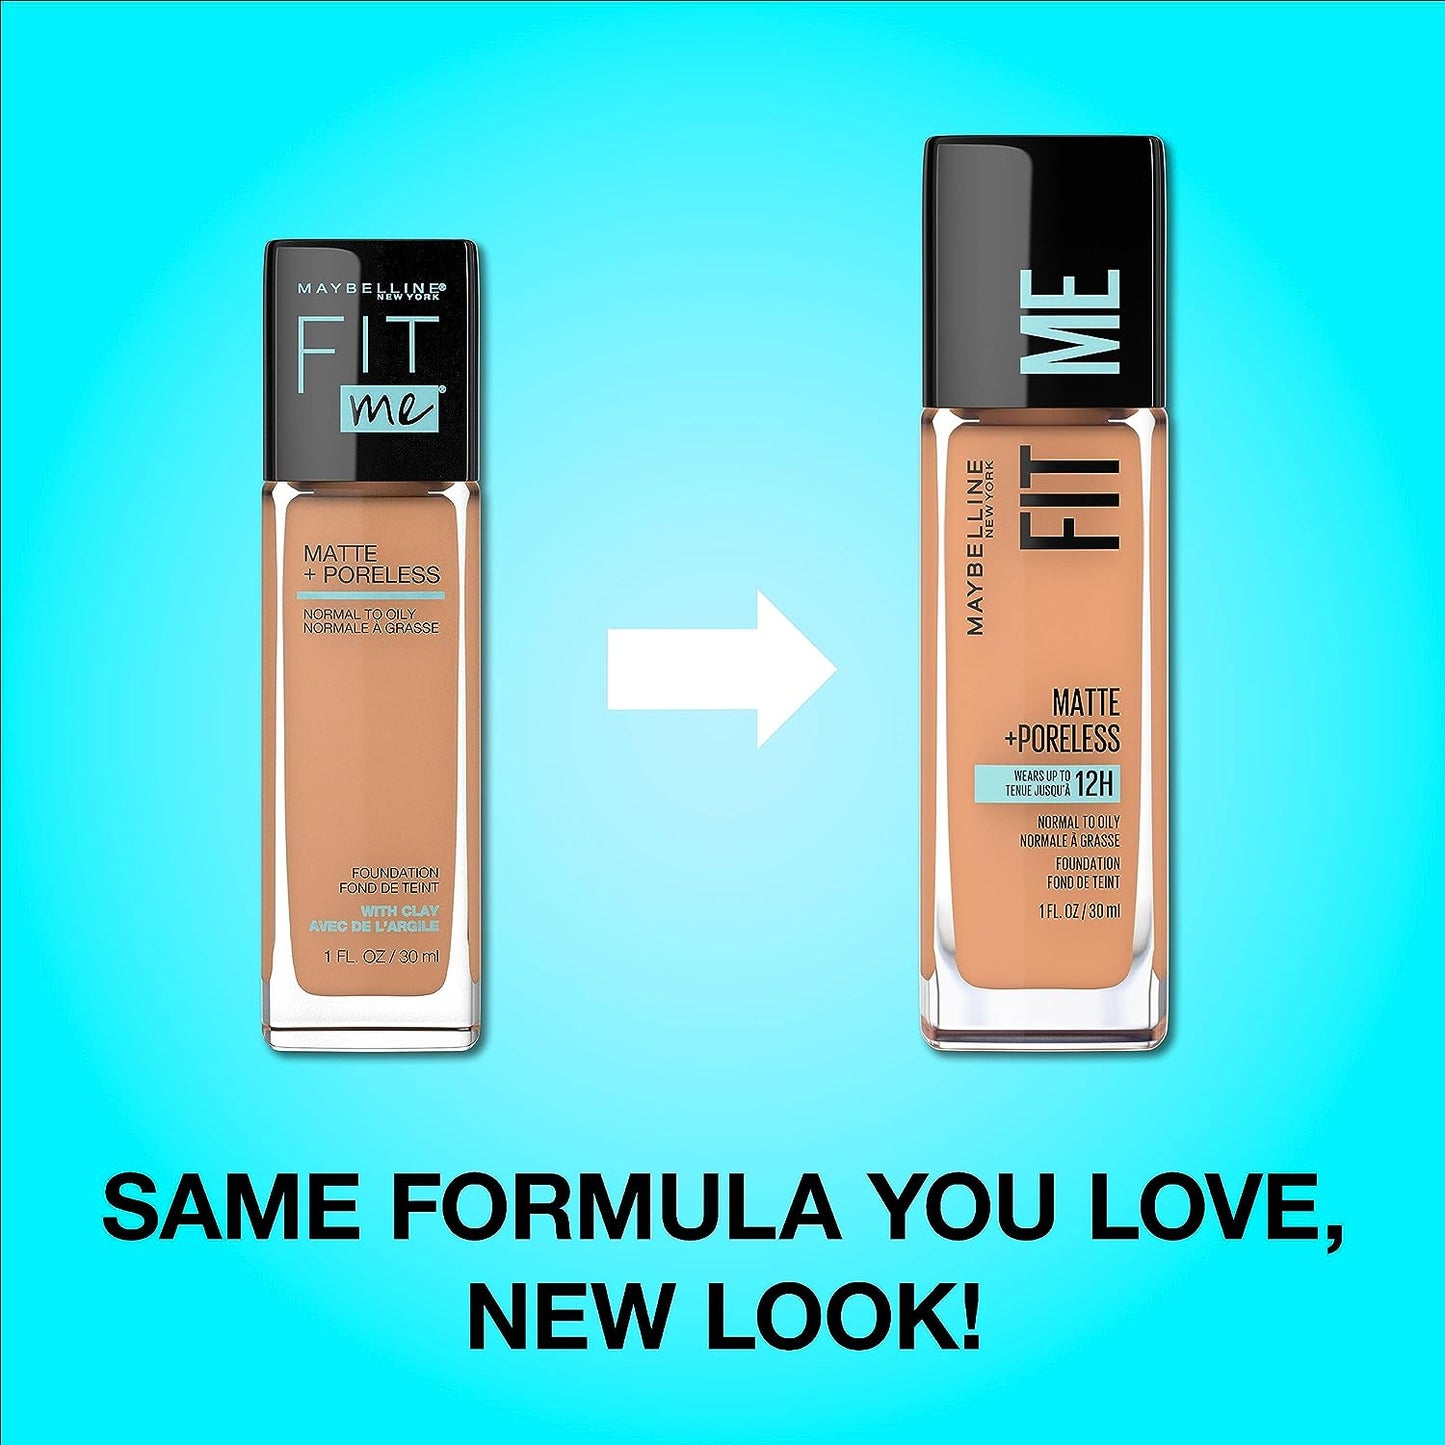 Maybelline Fit Me Matte + Poreless Liquid Oil-Free Foundation Makeup, Classic Tan, 1 Count (Packaging May Vary)